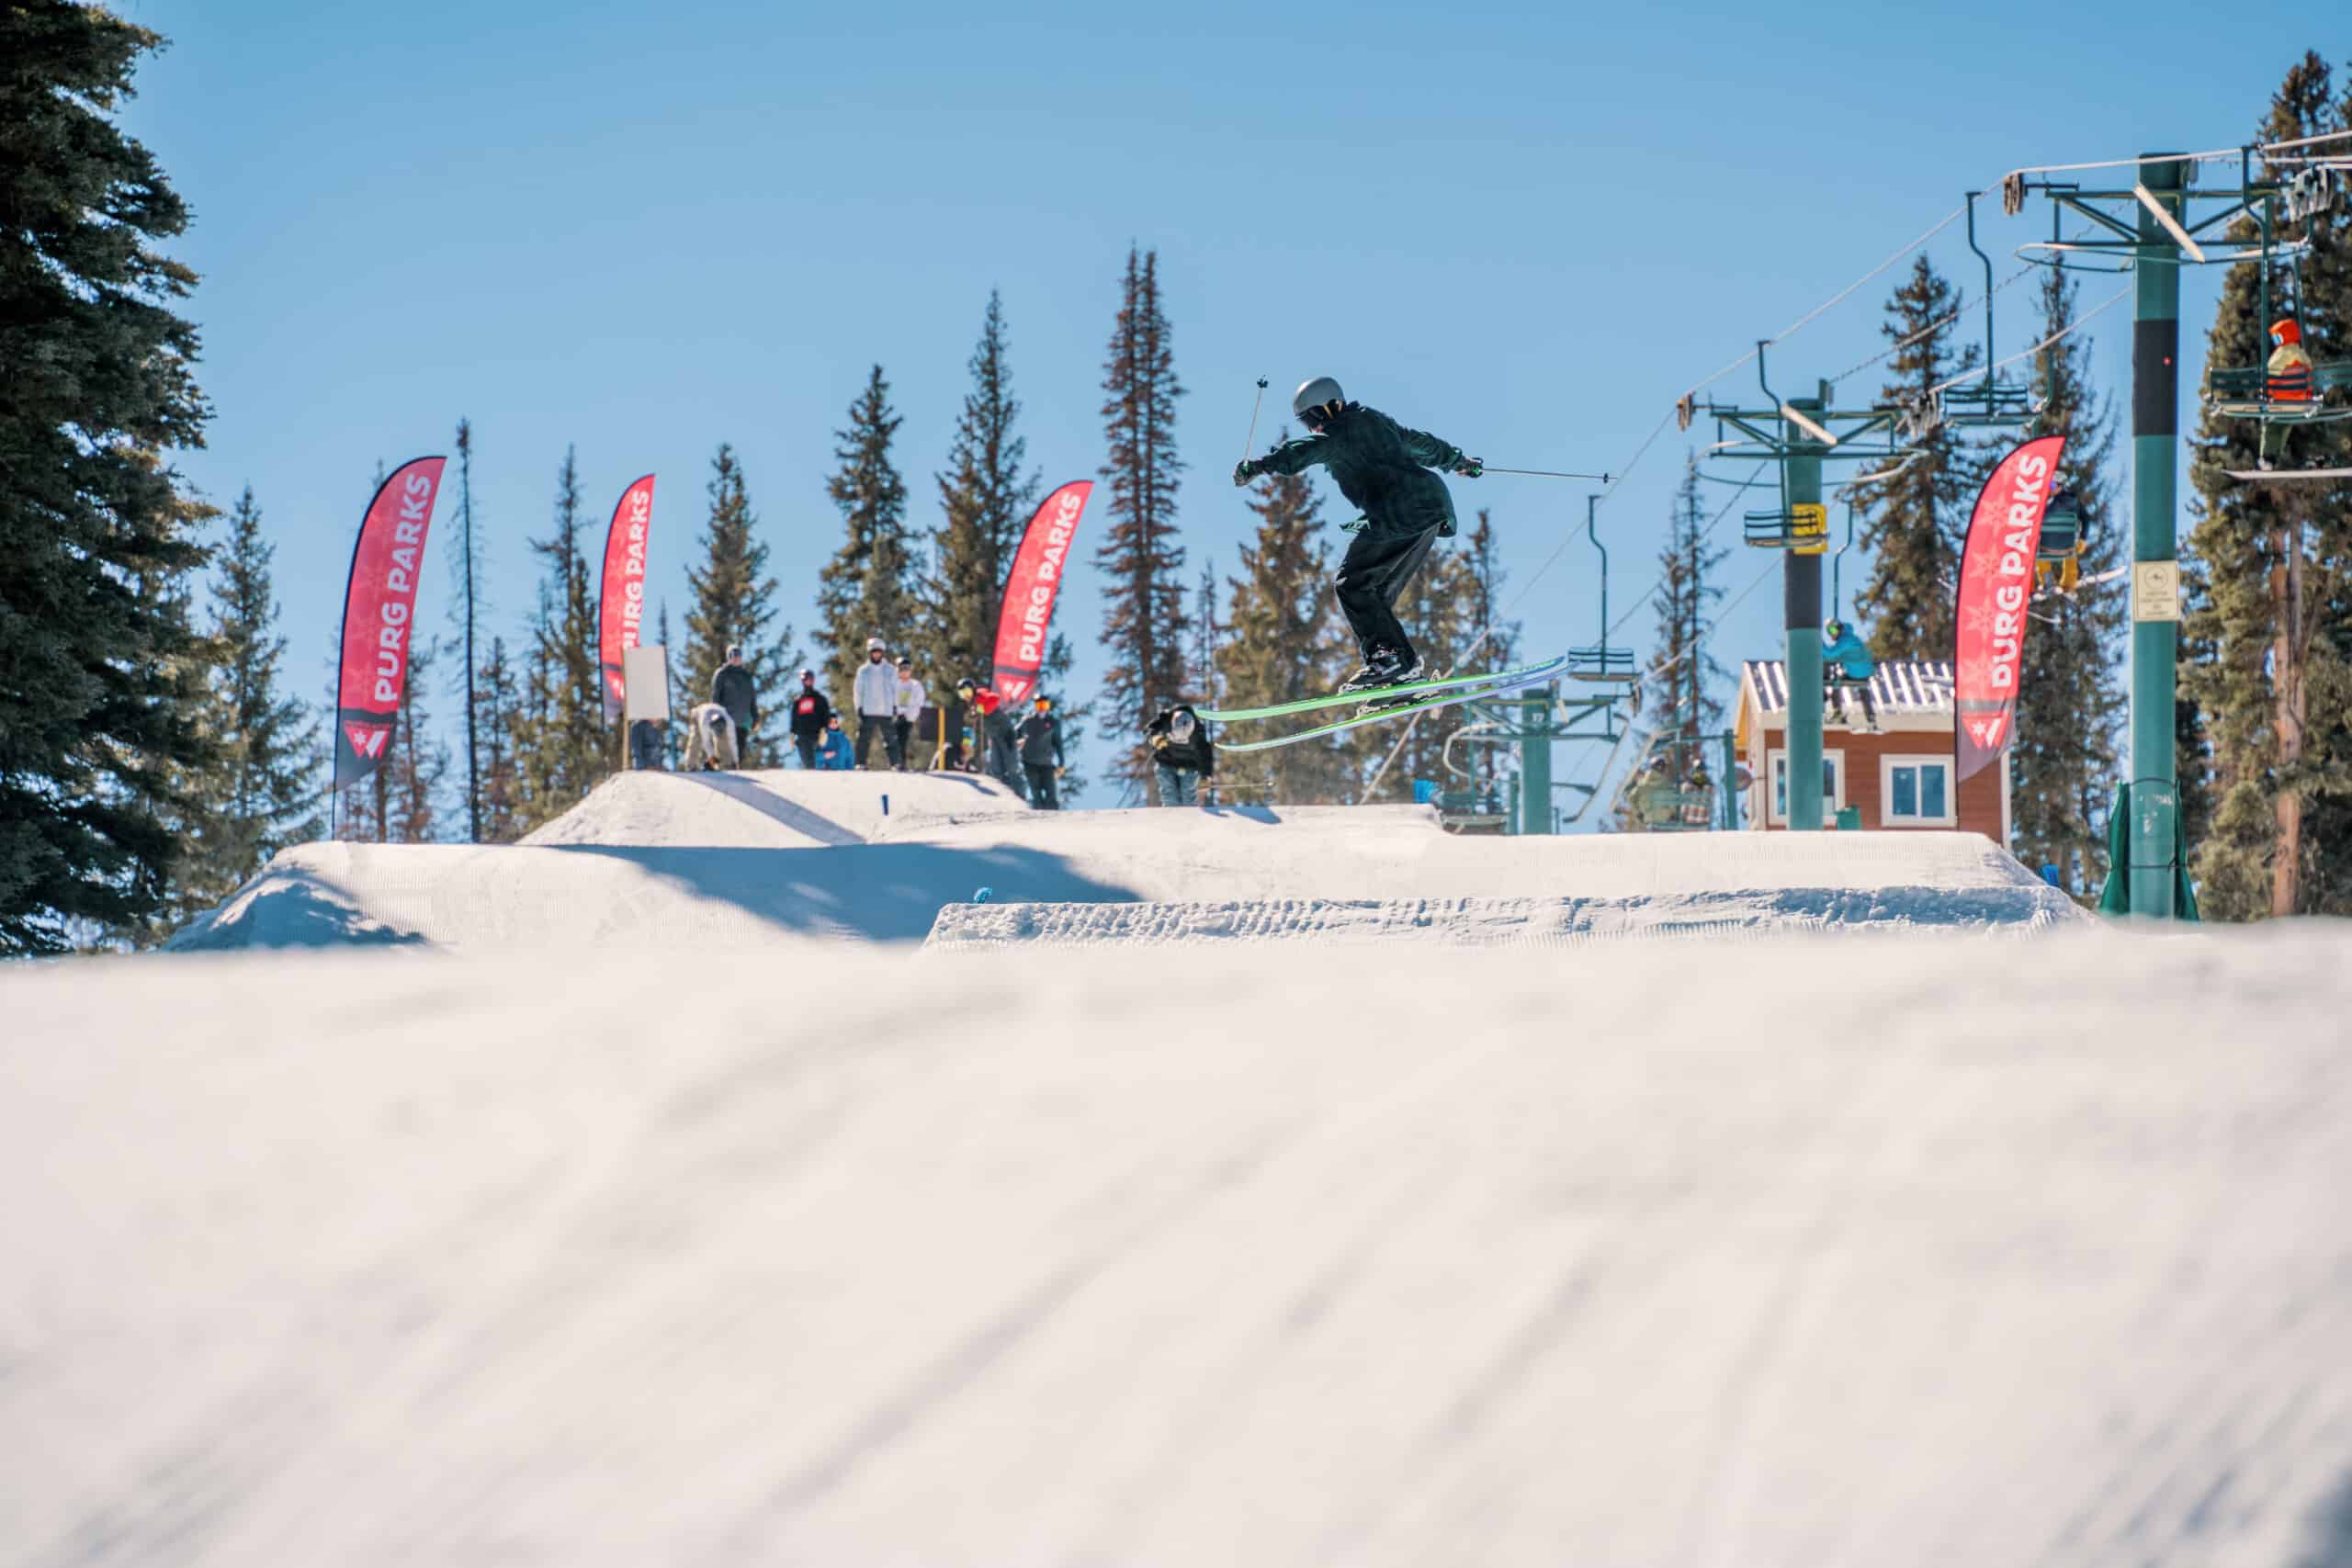 a skier catches air off a feature in the terrain park at Purgatory Resort